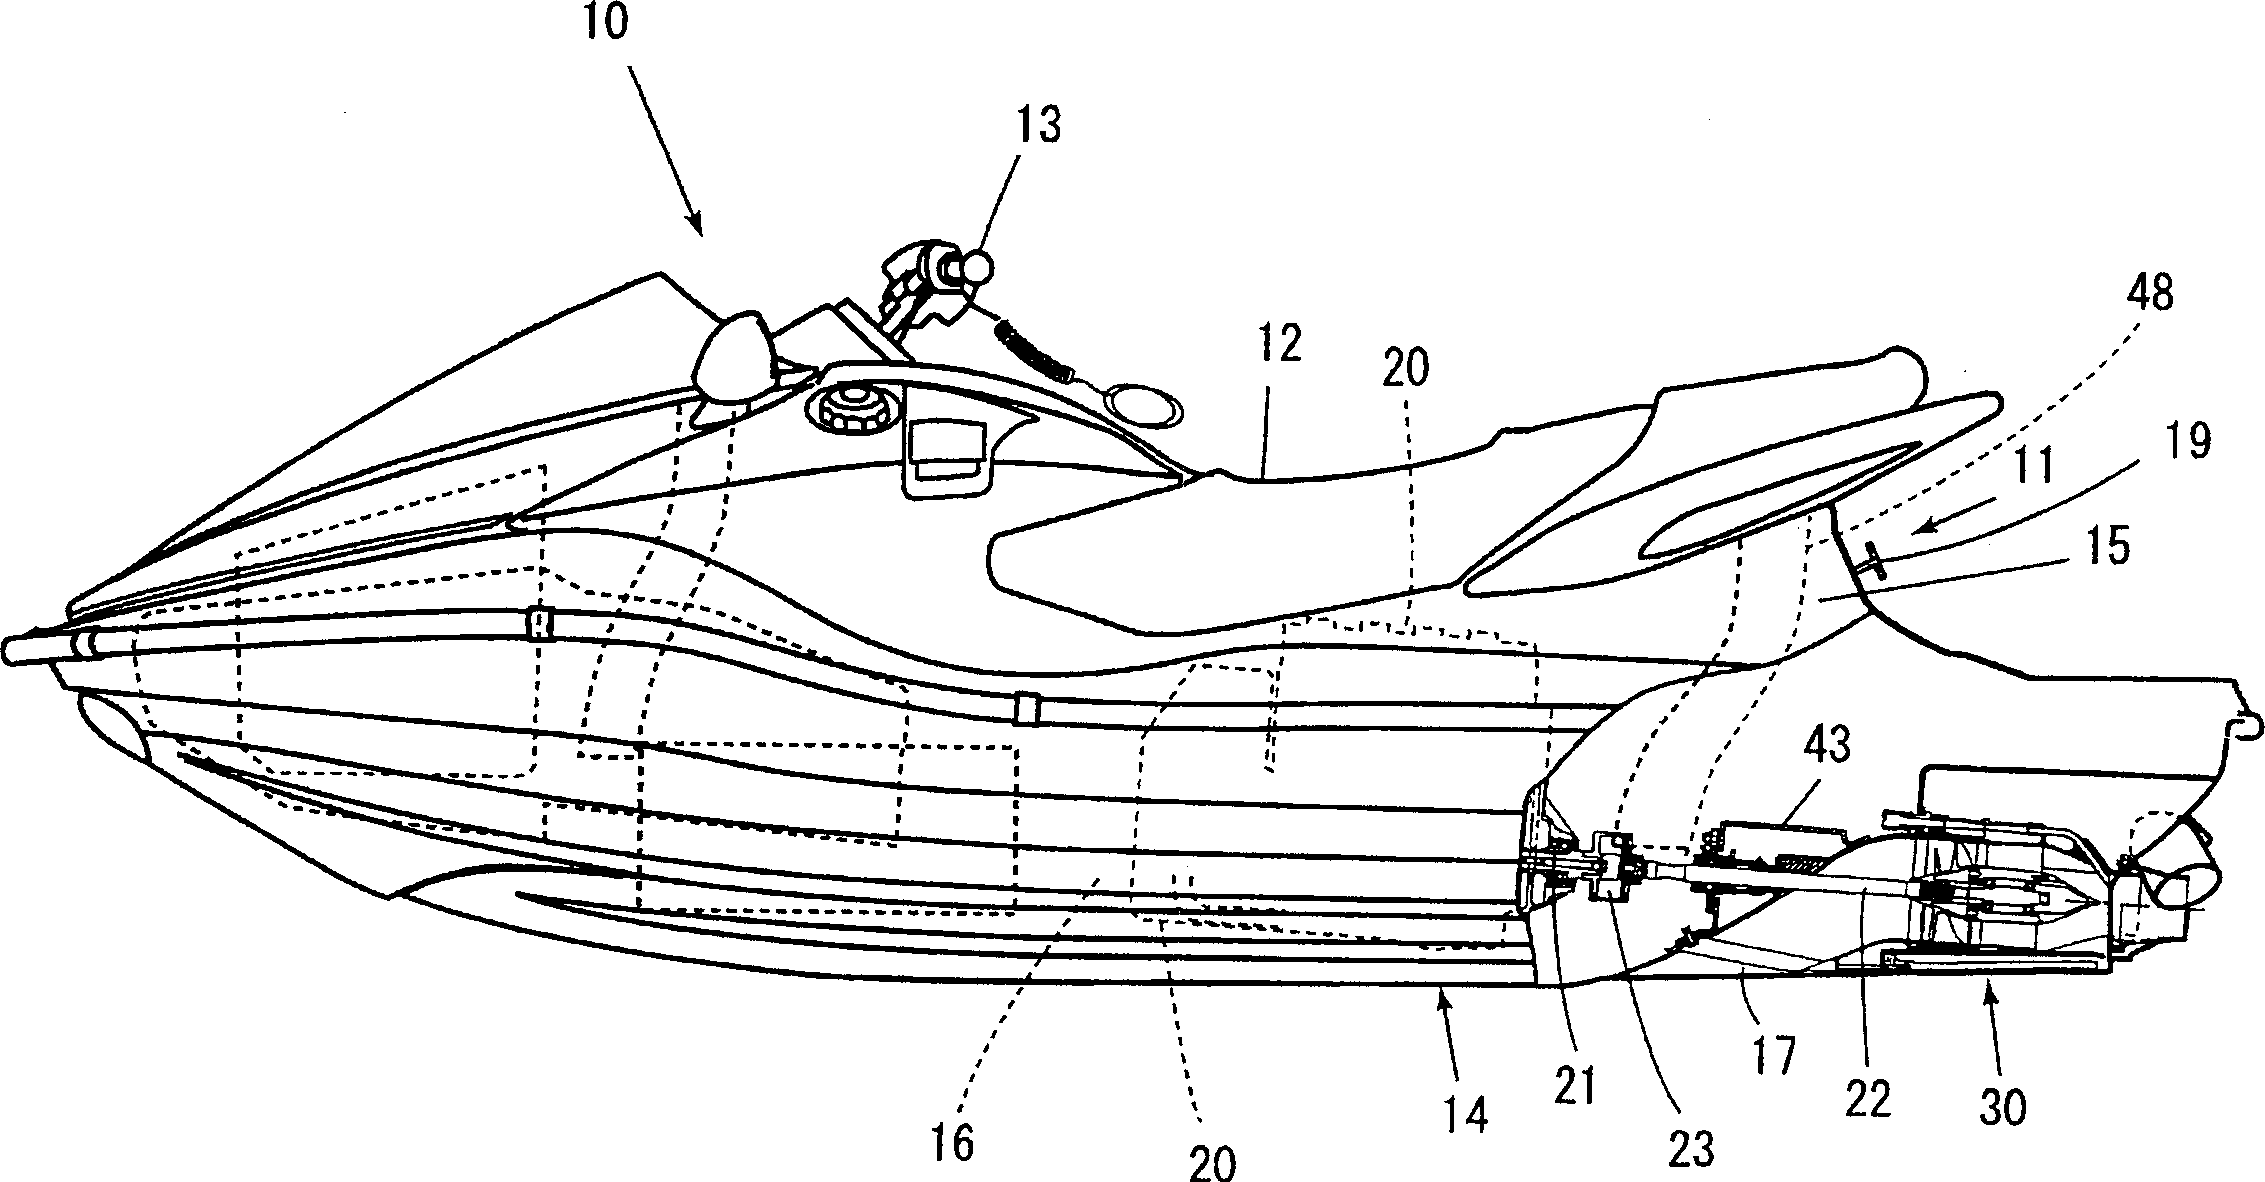 Bearing structure of drive shaft for ship